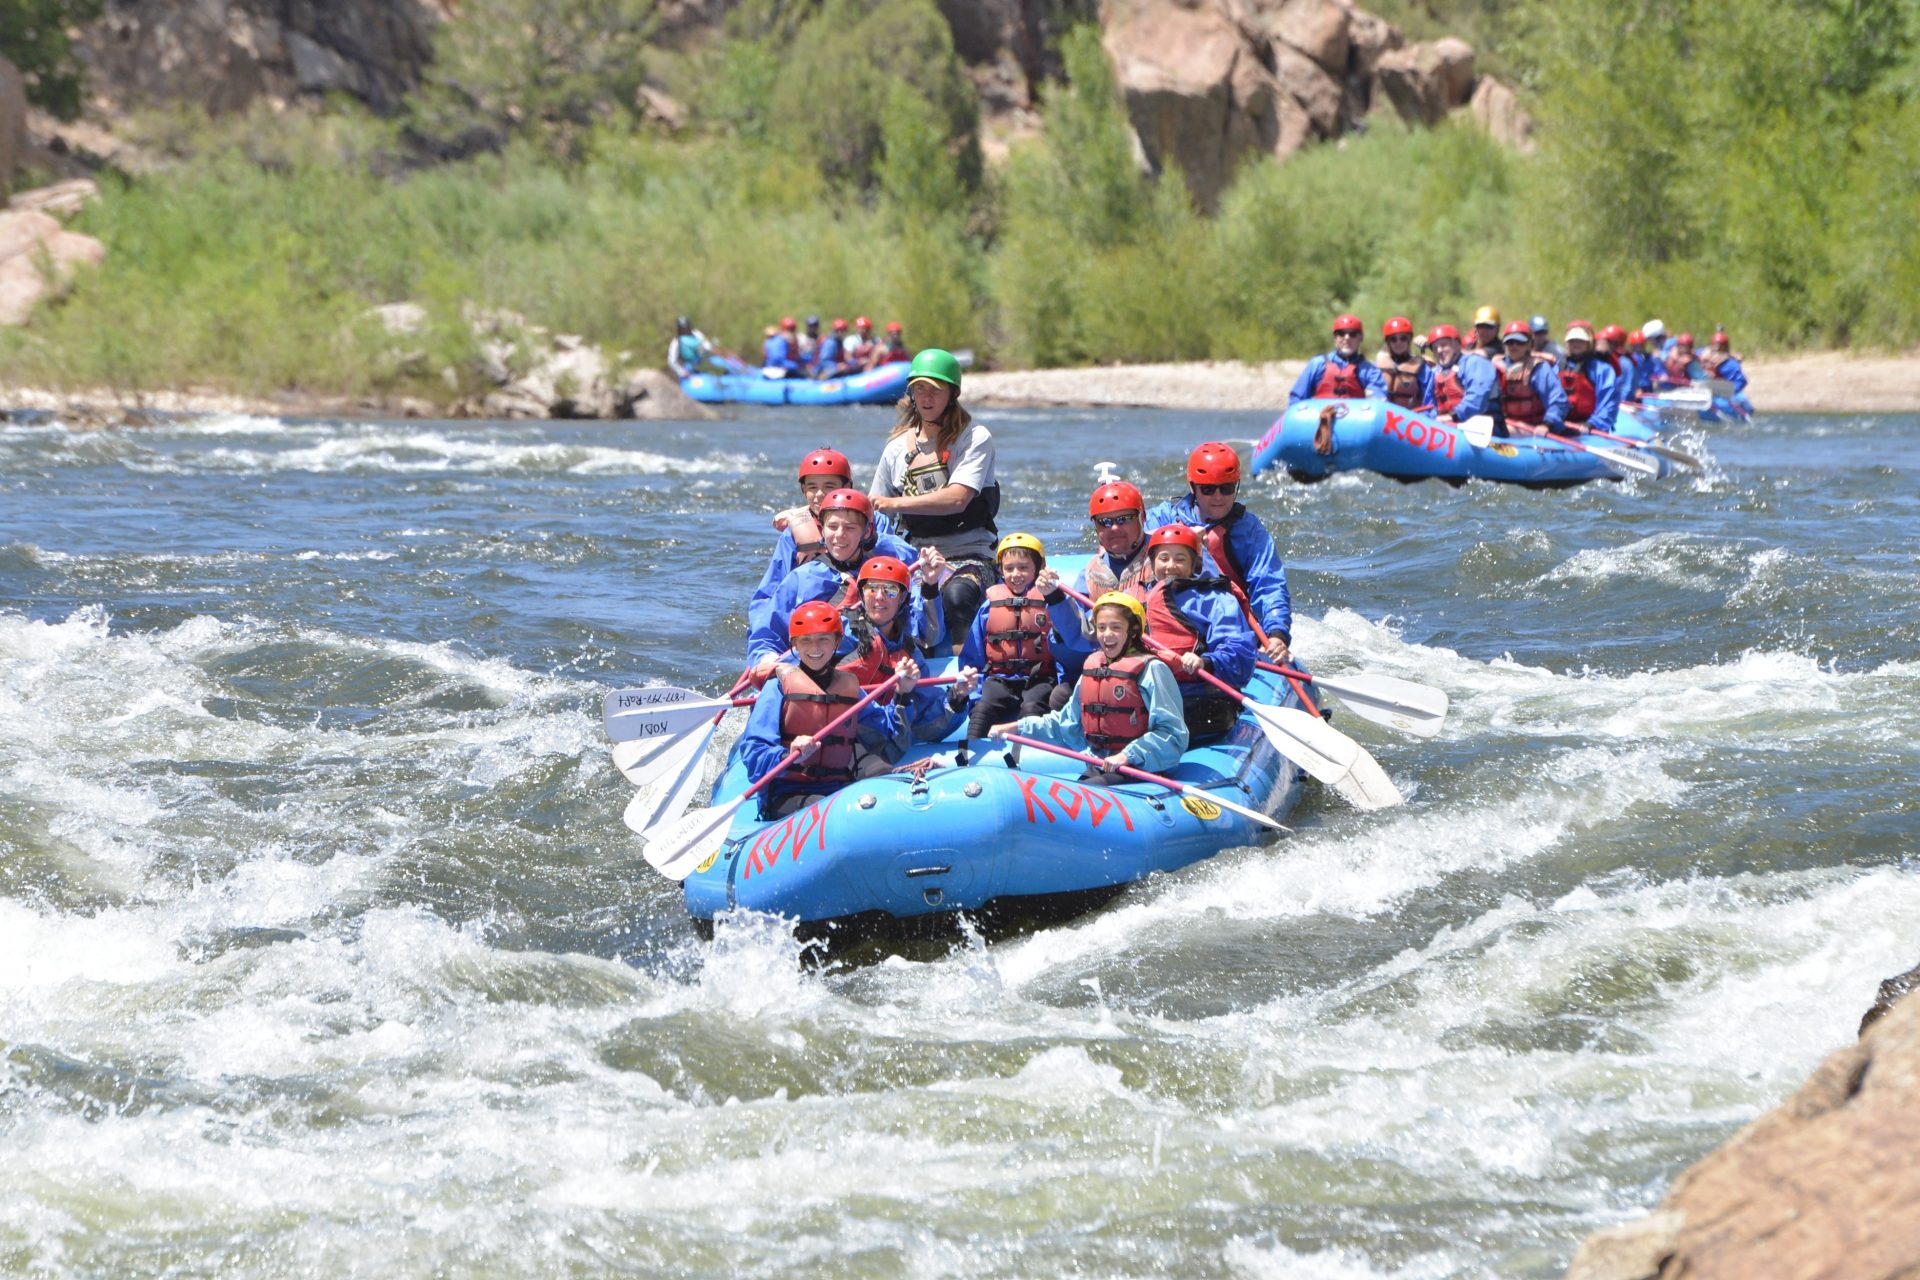 A tour group engaged in rafting near Buena Vista, CO